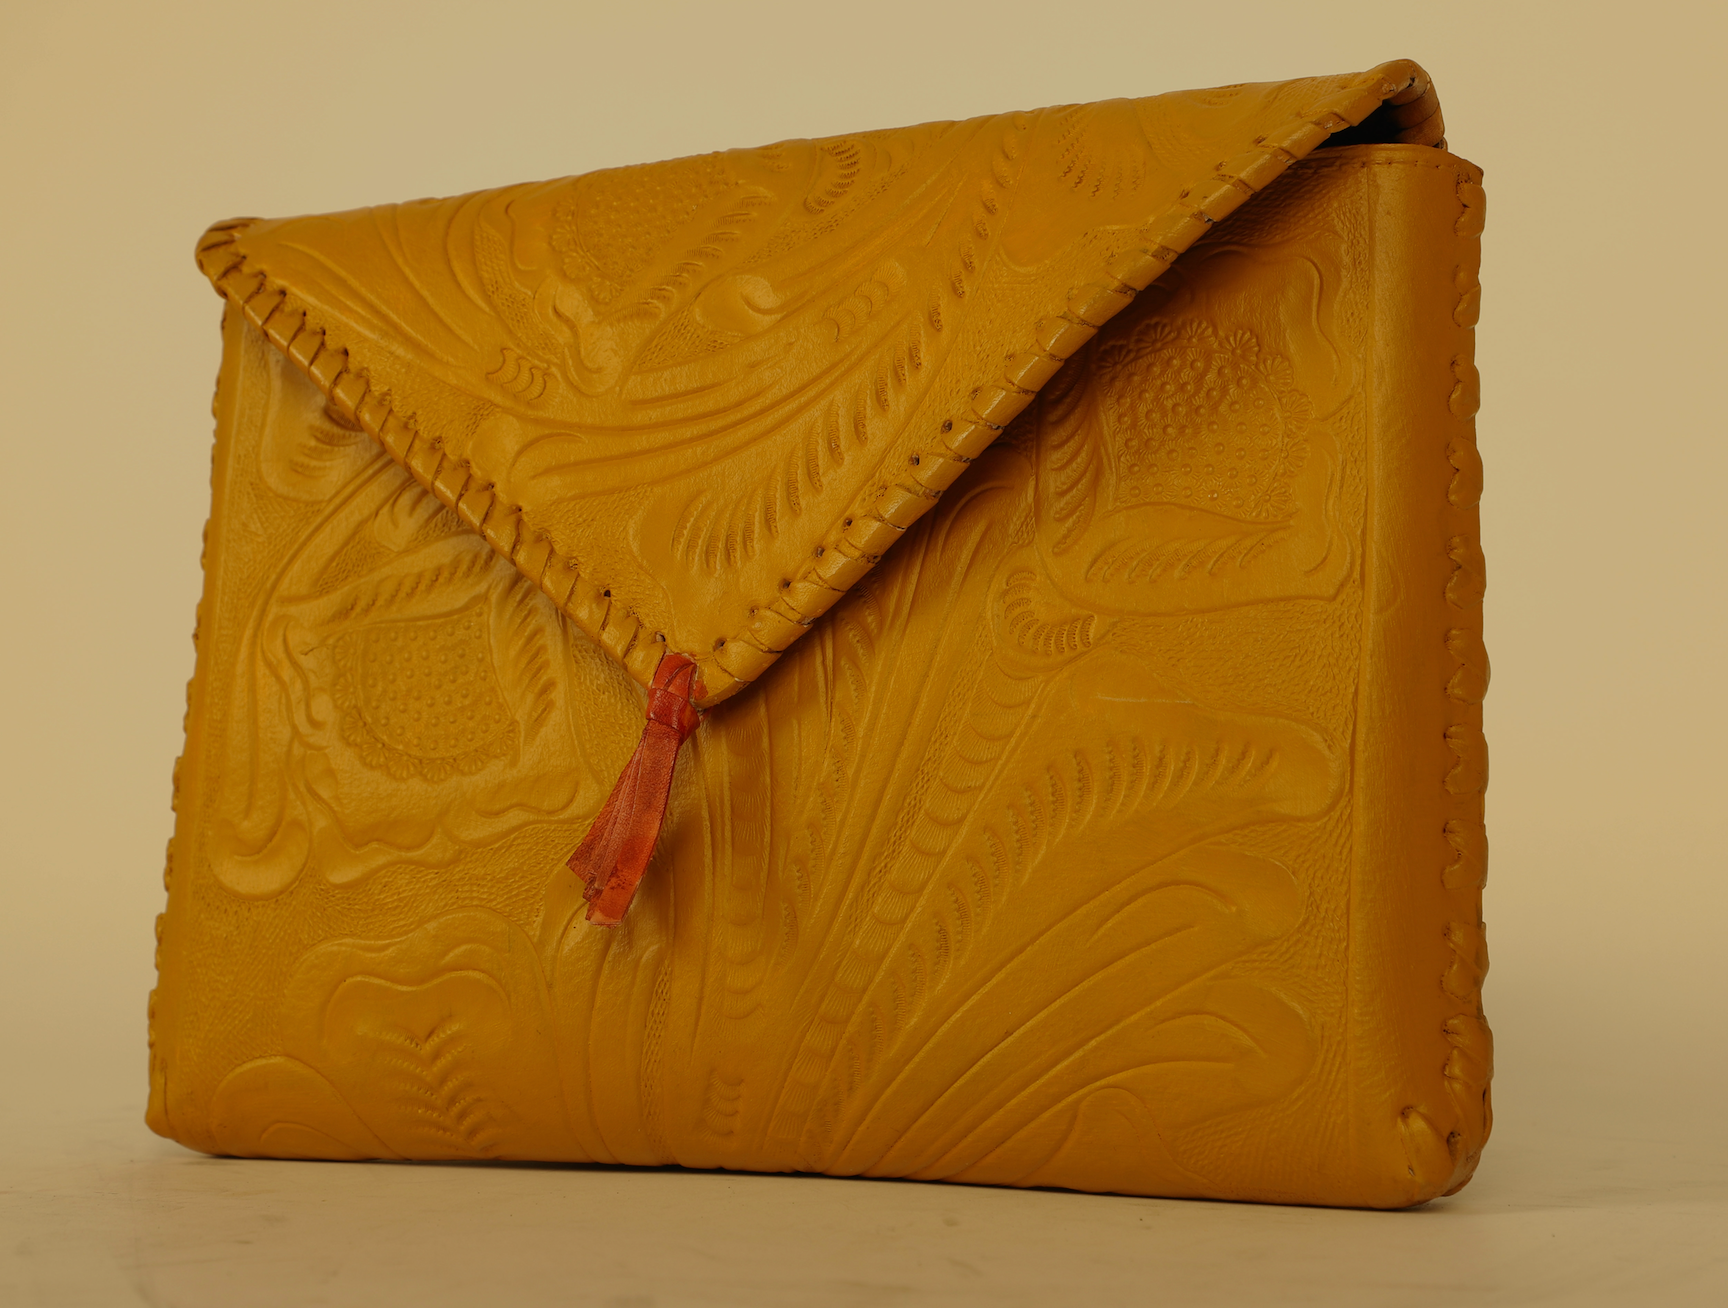 Small sized full leather crossbody bag with a triangular flap traditional mexican design on the outer flap of the purse. Fully lined with suede.  Front view in color yellow. 